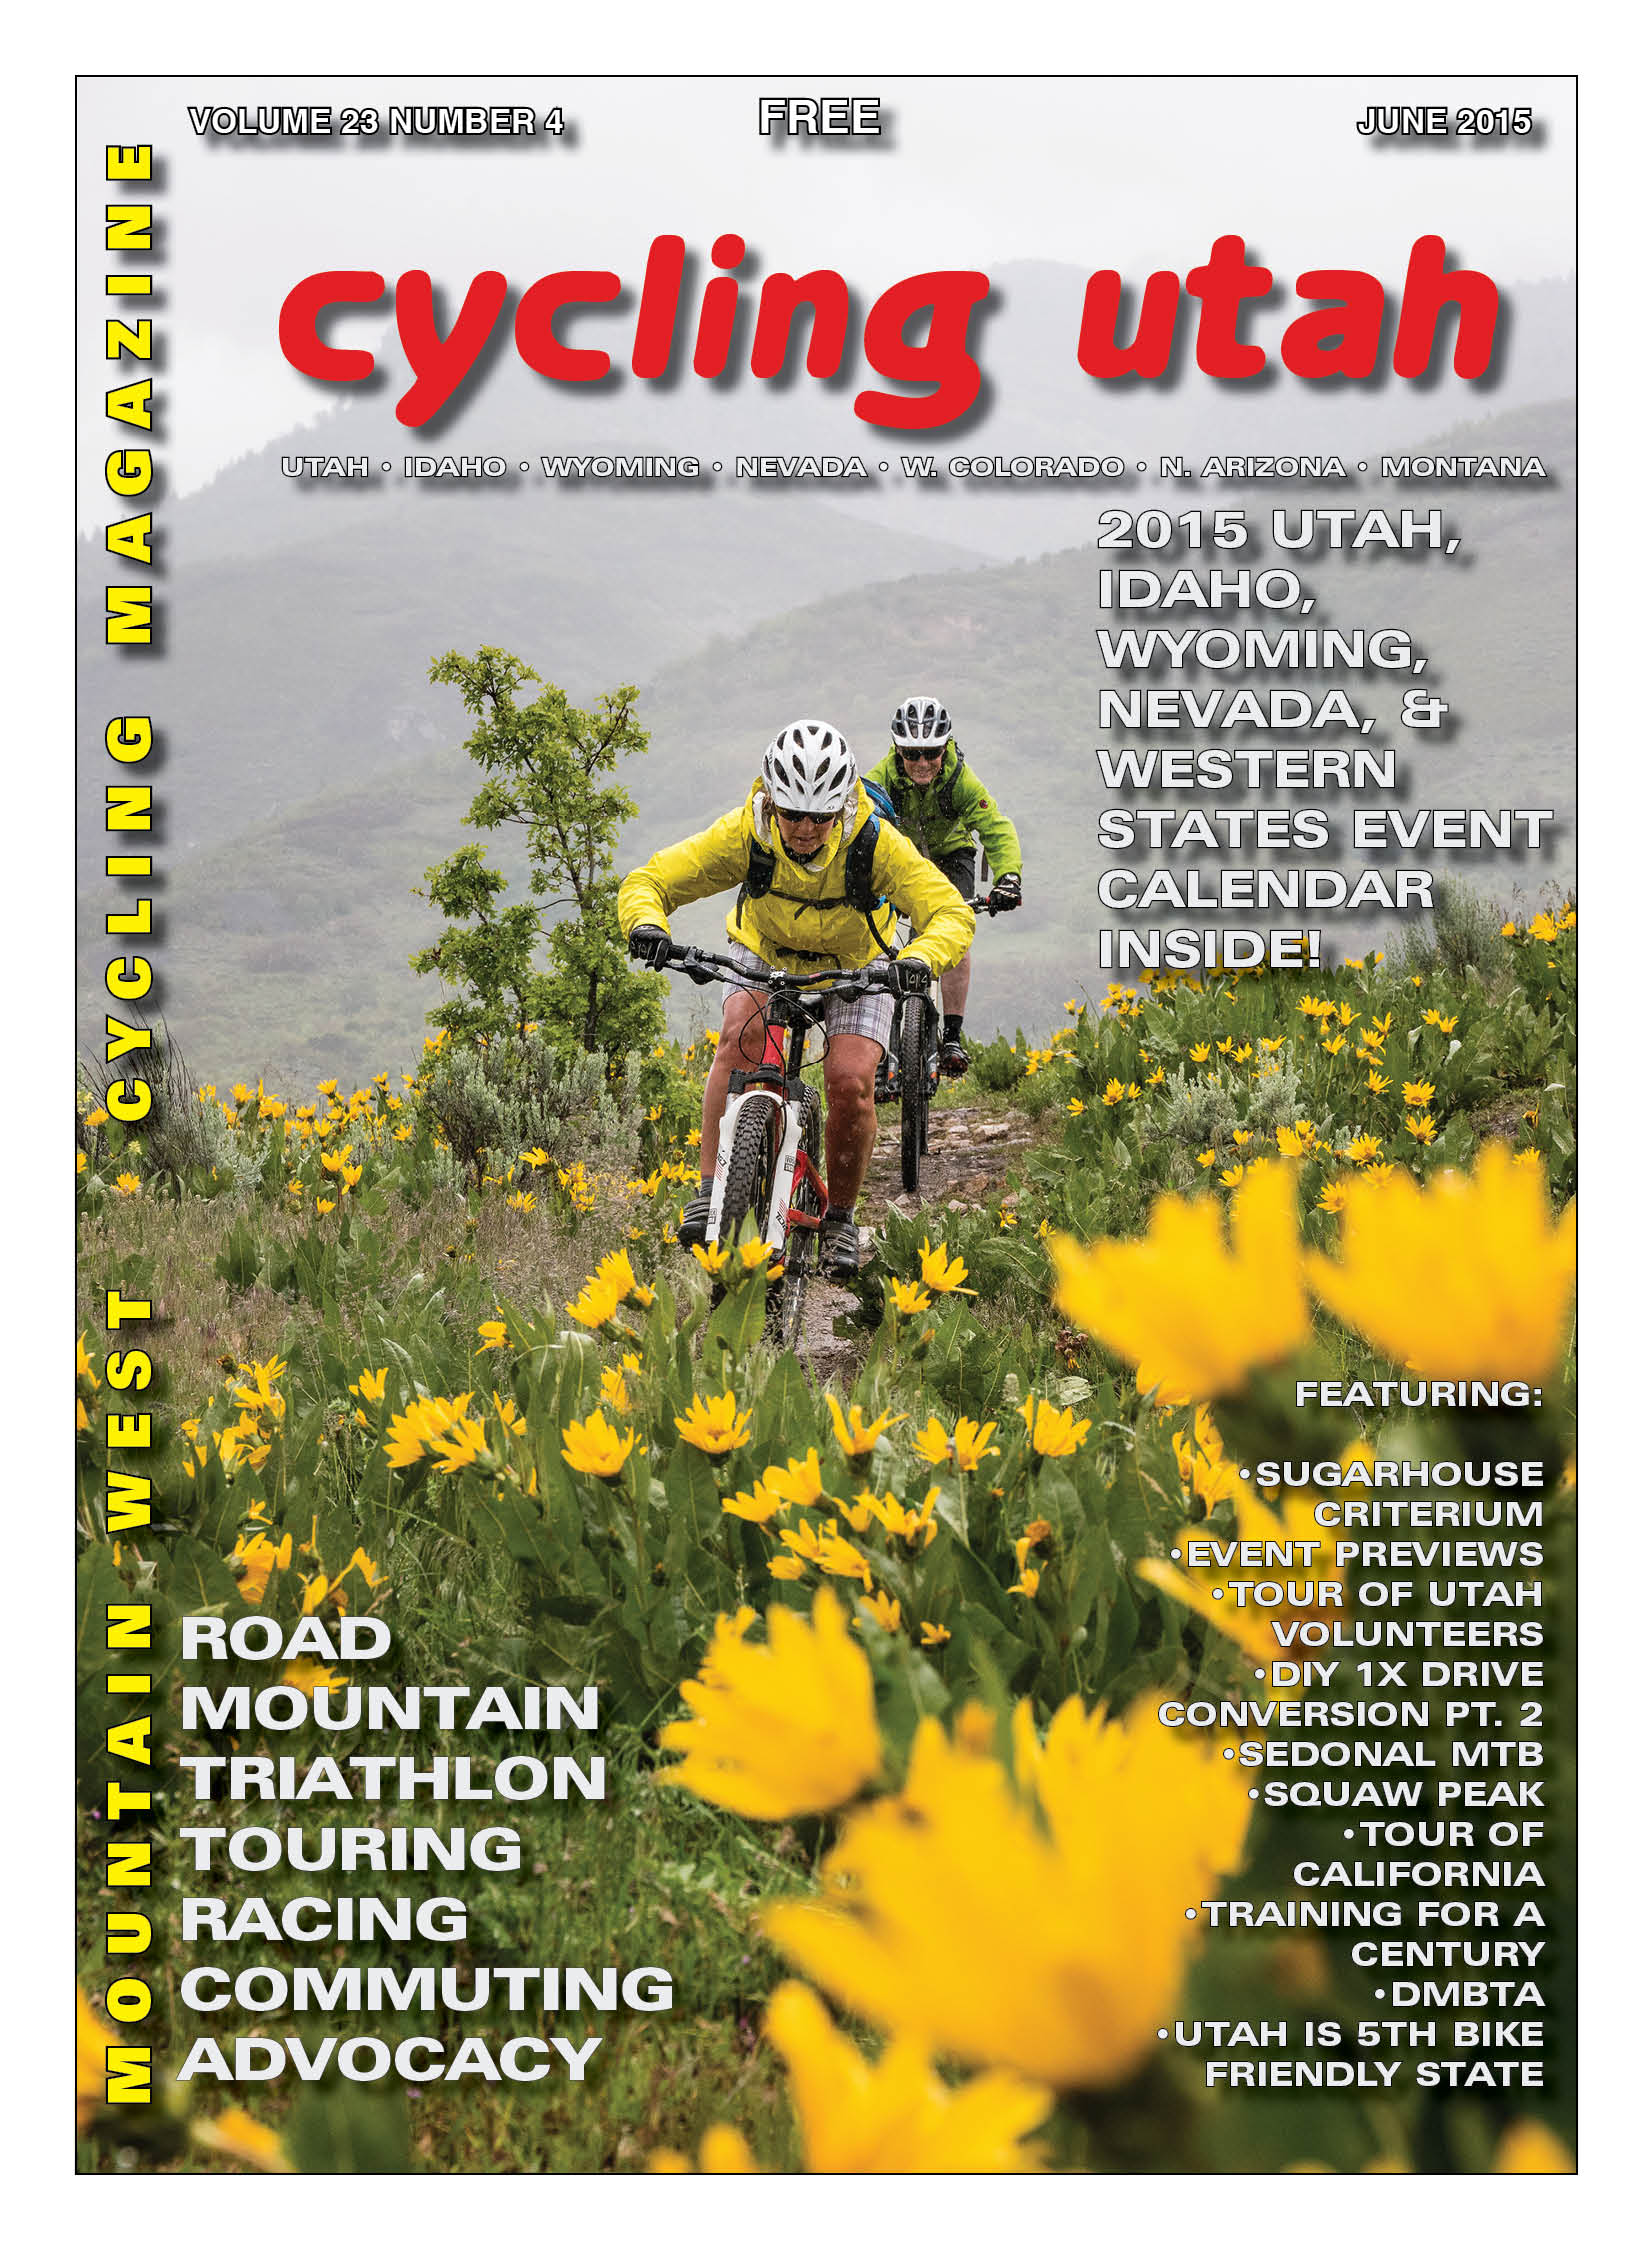 Cycling Utah’s June 2015 Issue is Now Available!